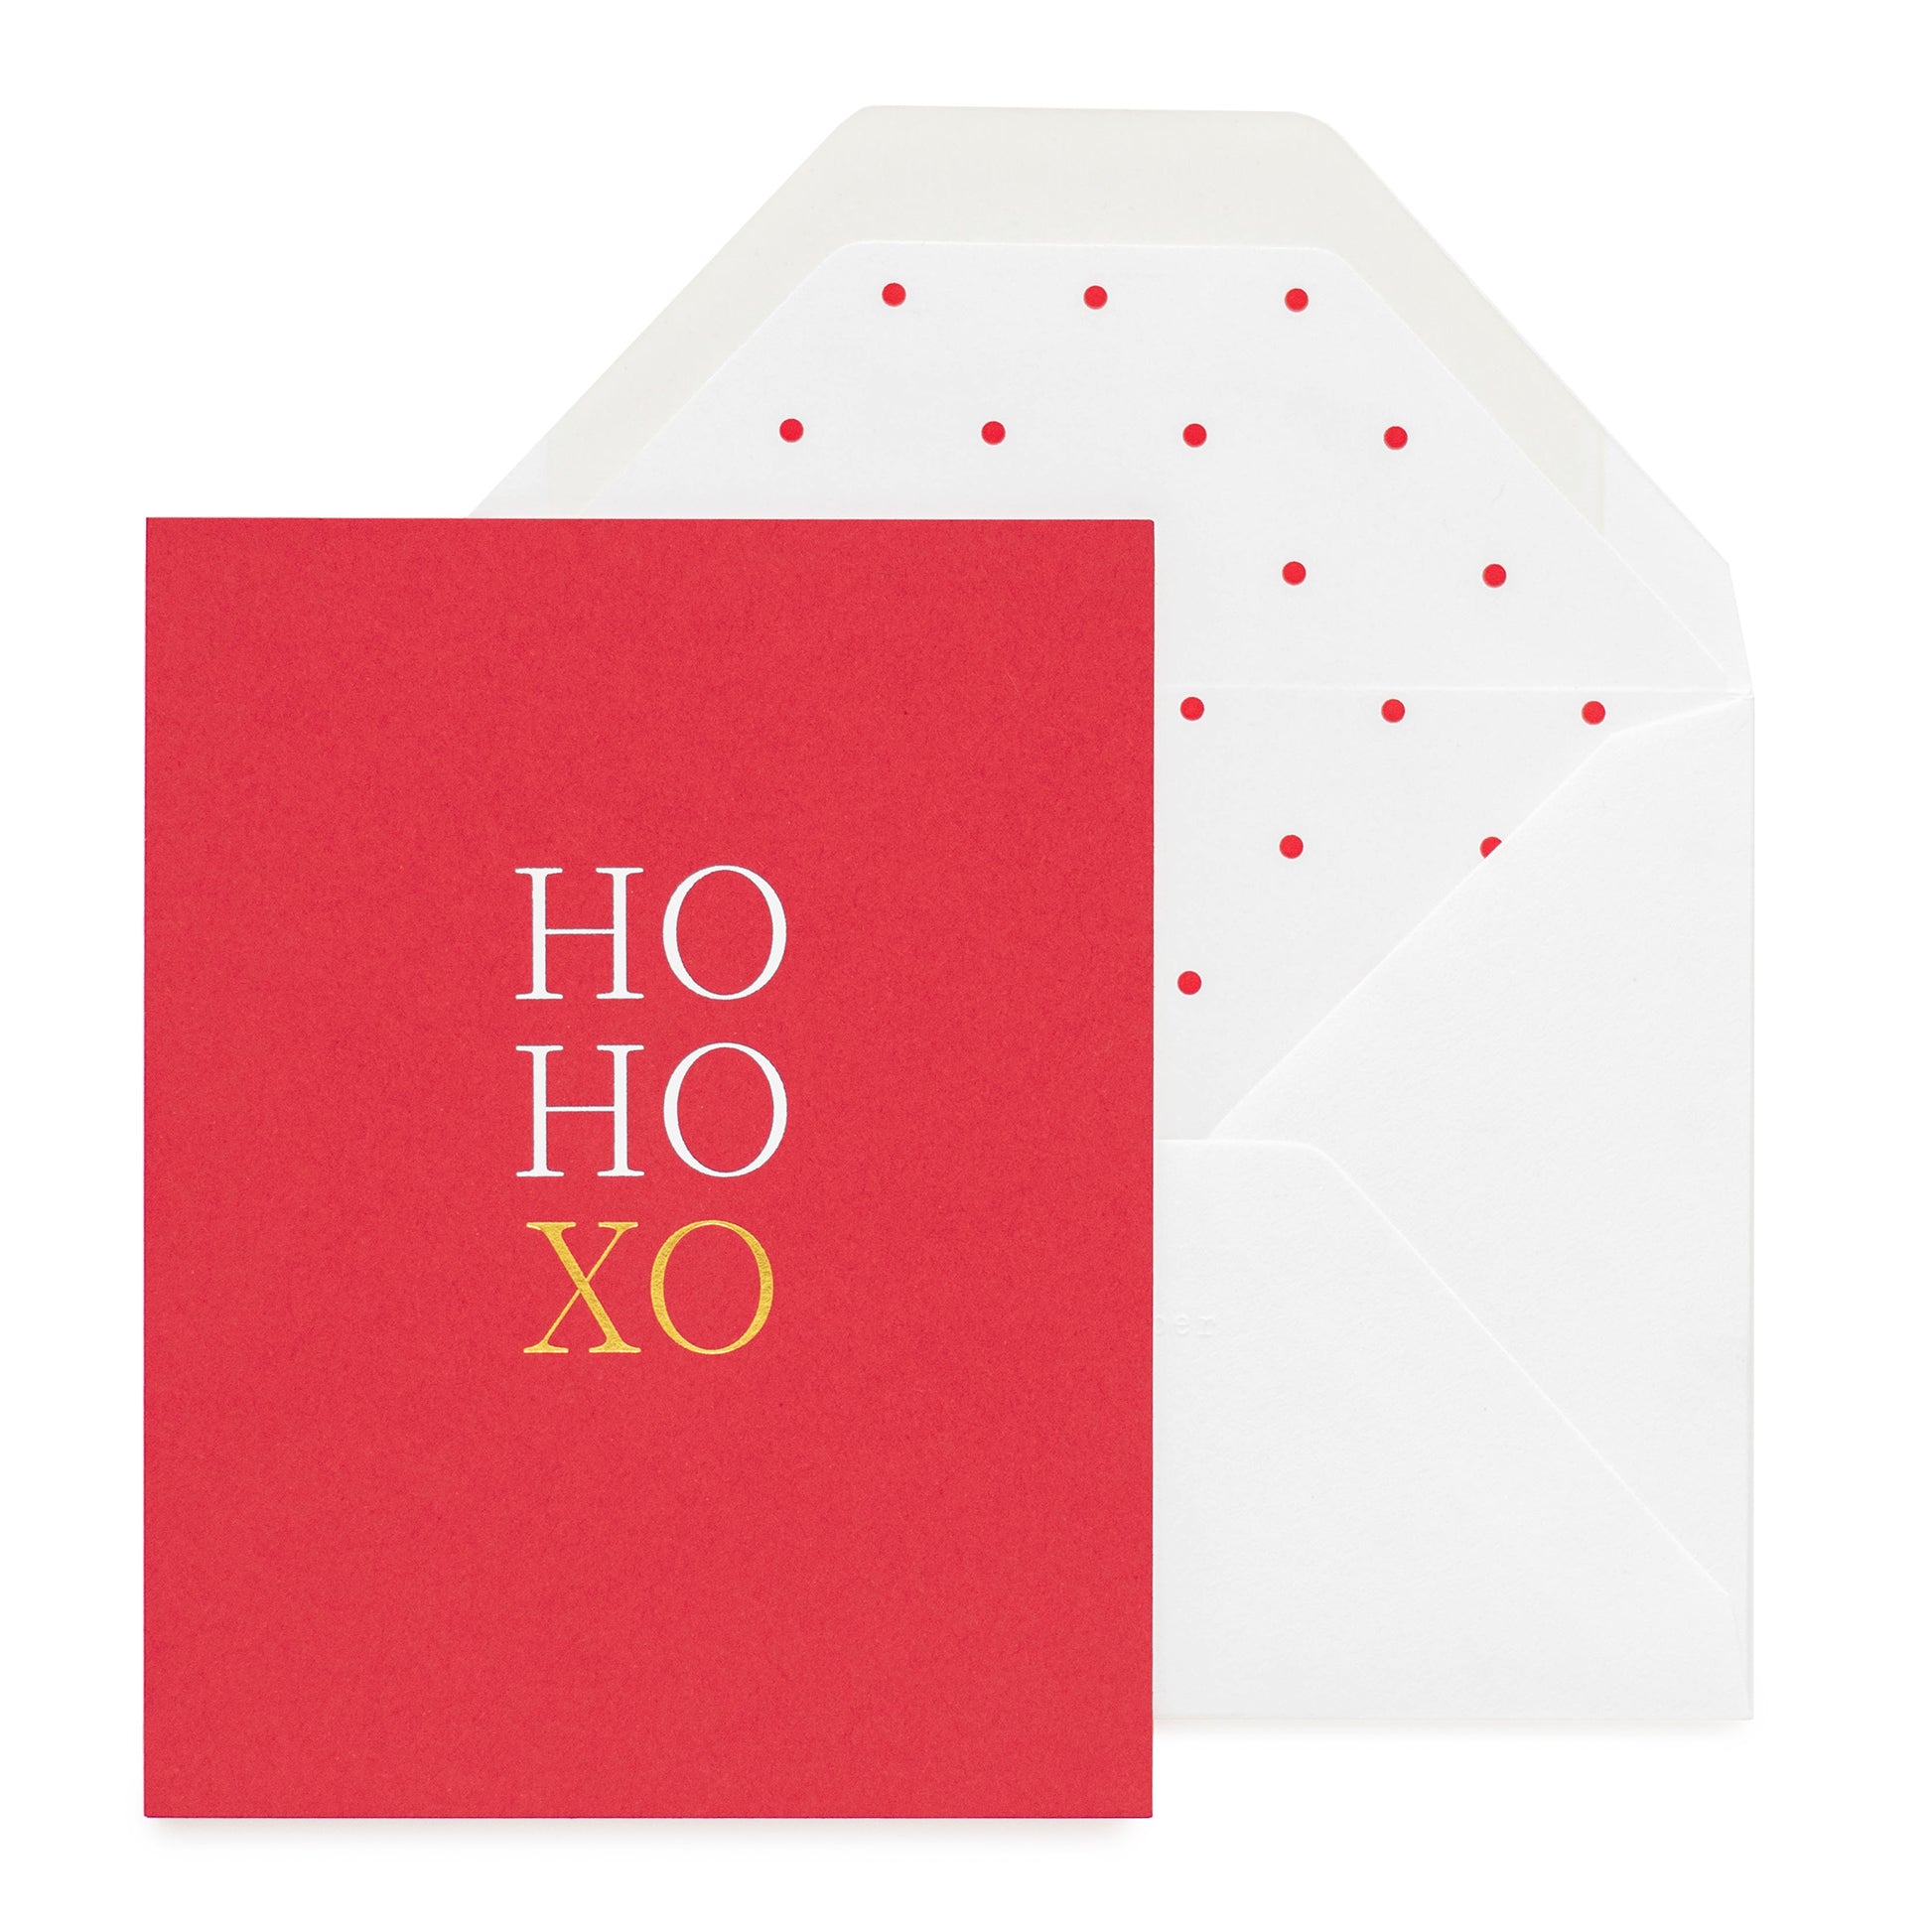 Red card with HoHoXo and a white envelope with red dot liner